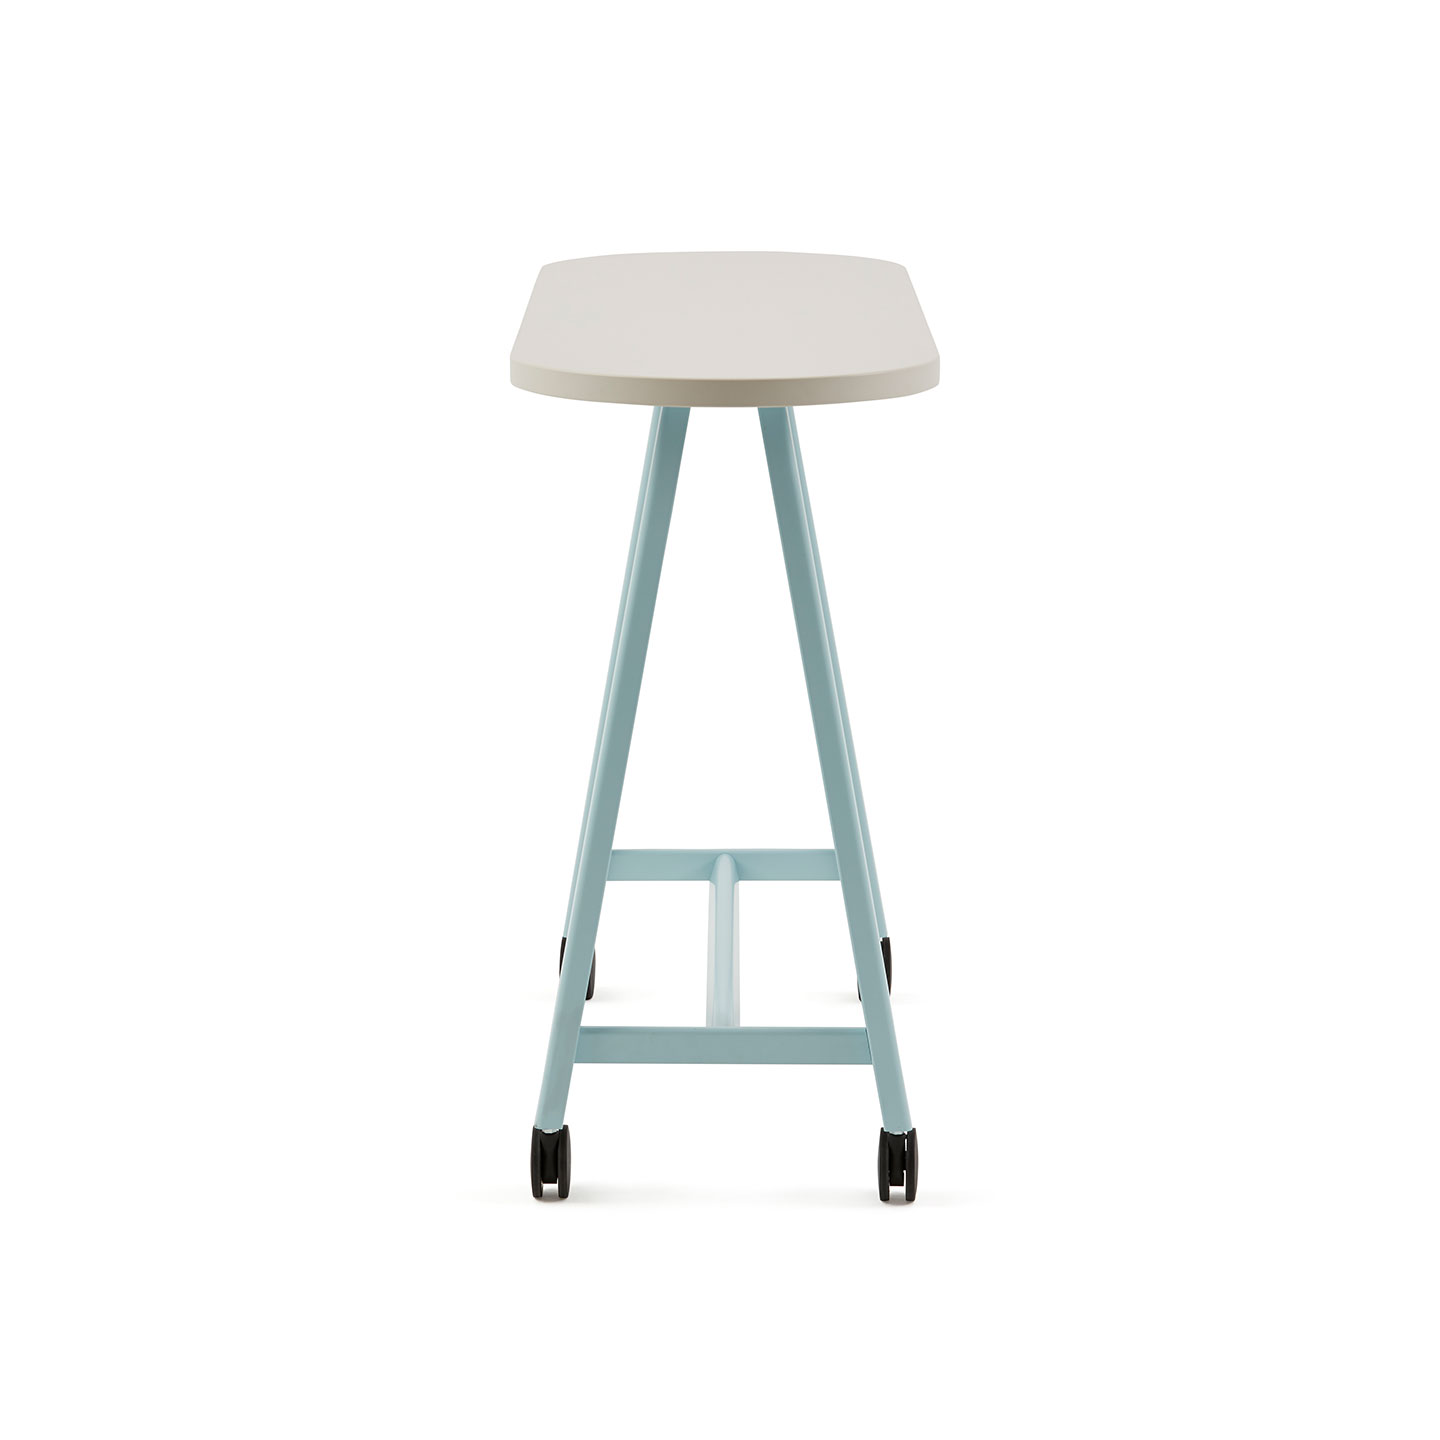 Haworth PopUp Table with chalk top and 4 legs with wheels